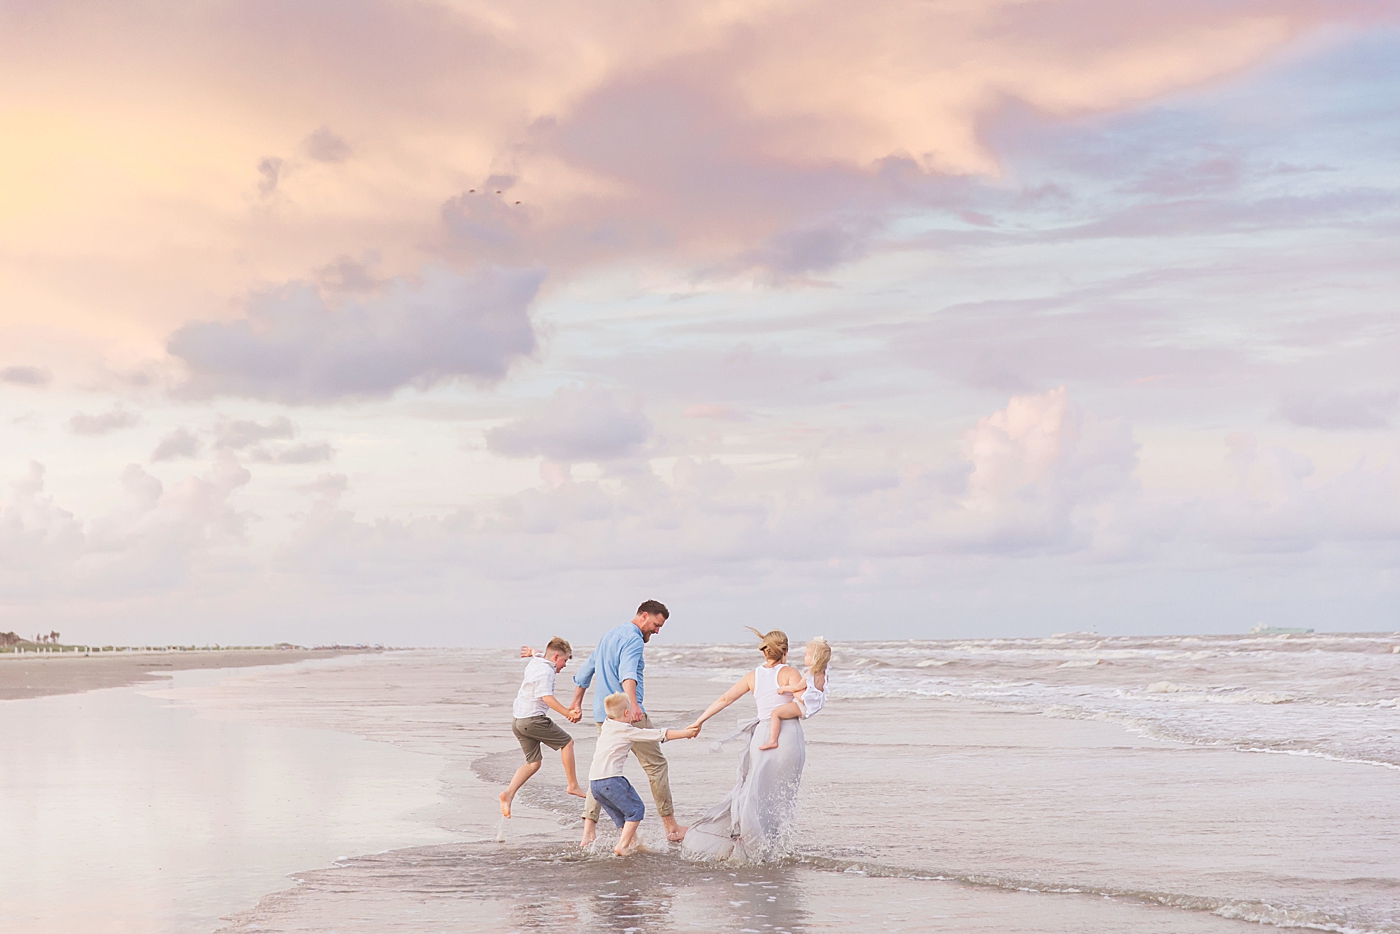 Family playing in the water on the beach during photoshoot. Photo by Fresh Light Photography